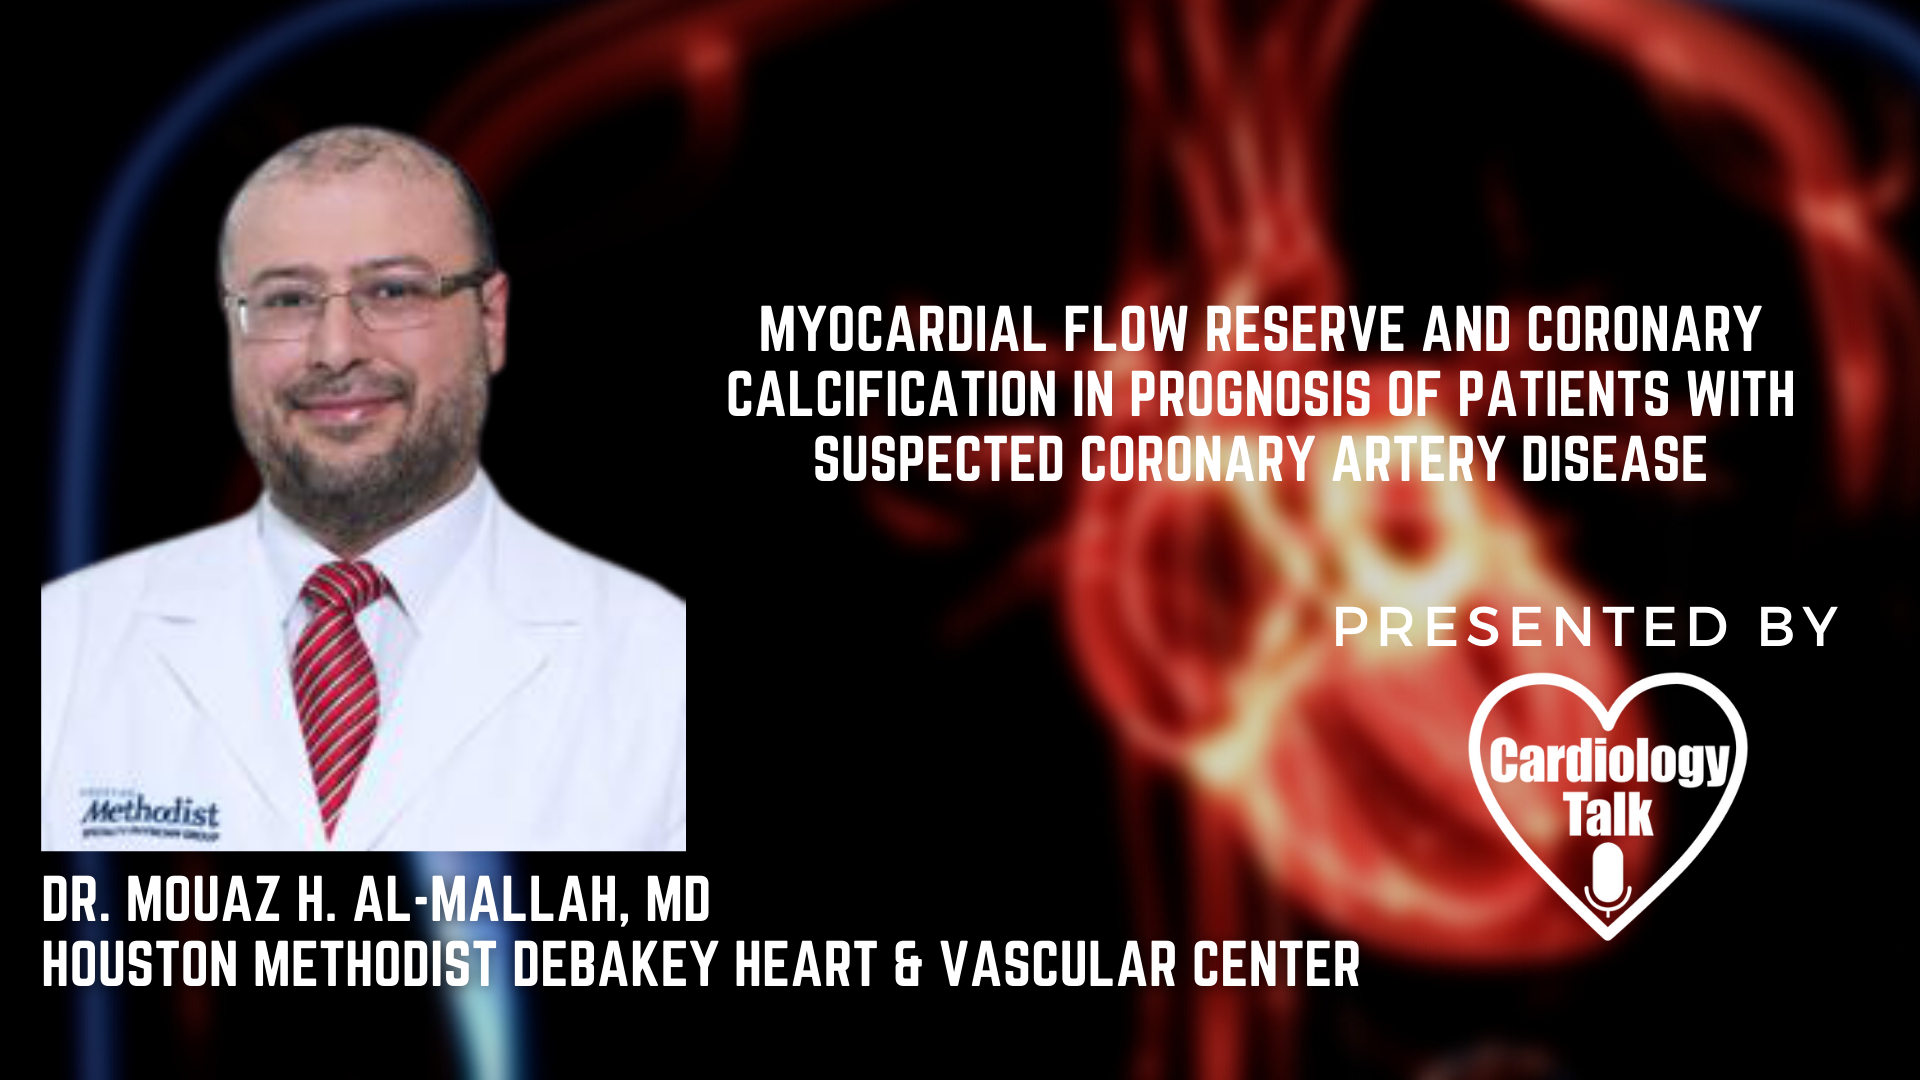 Dr. Mouaz H. Al-Mallah, MD-Myocardial Flow Reserve and Coronary Calcification in Prognosis of Patients With Suspected Coronary Artery Disease